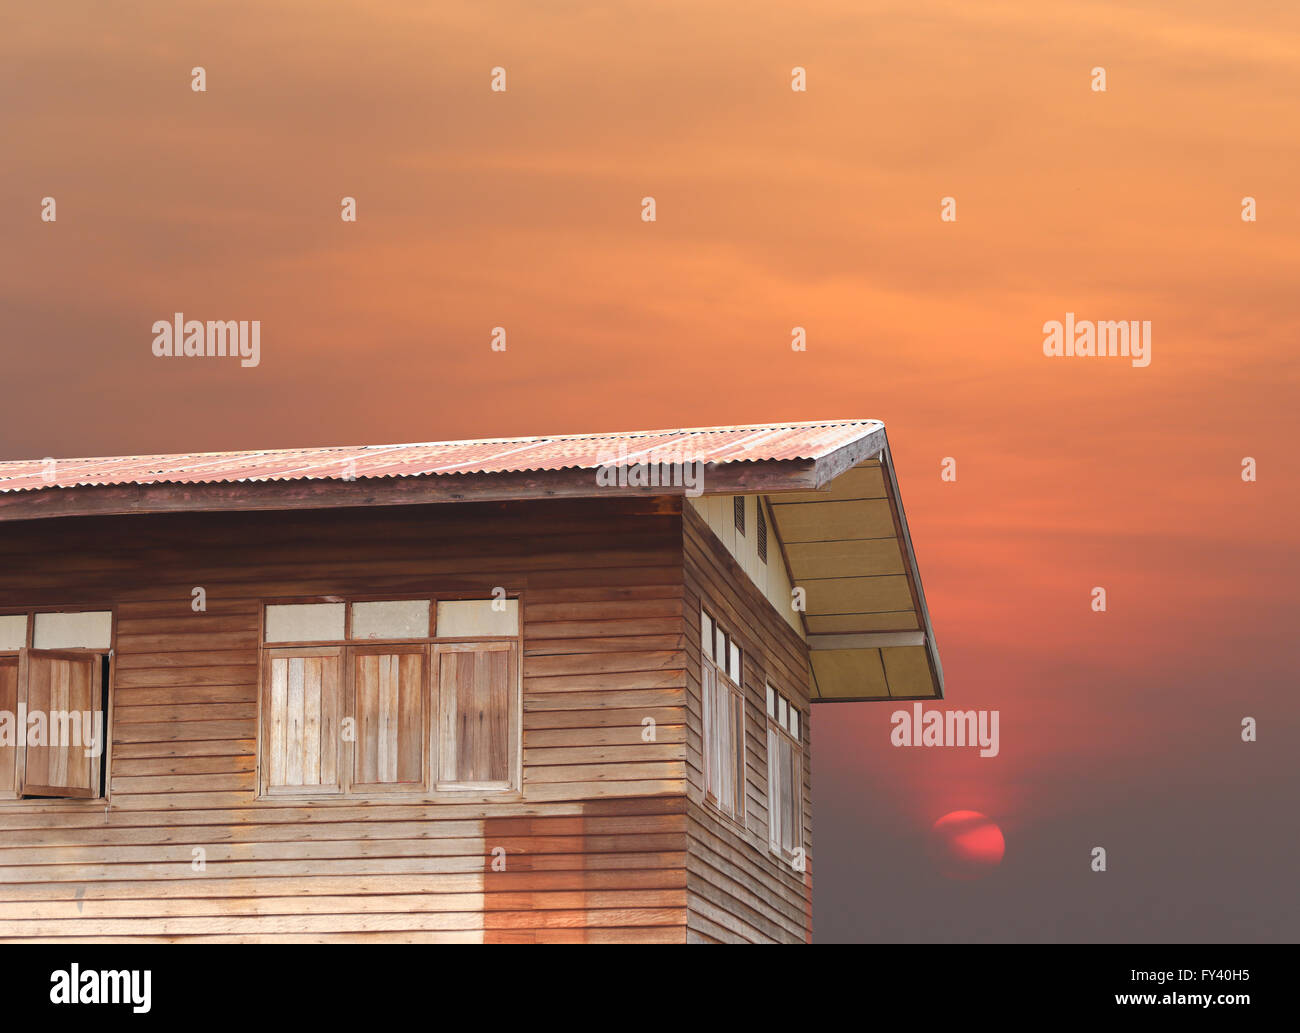 Old wooden house architectural style of Thailand design and sunset in evening. Stock Photo